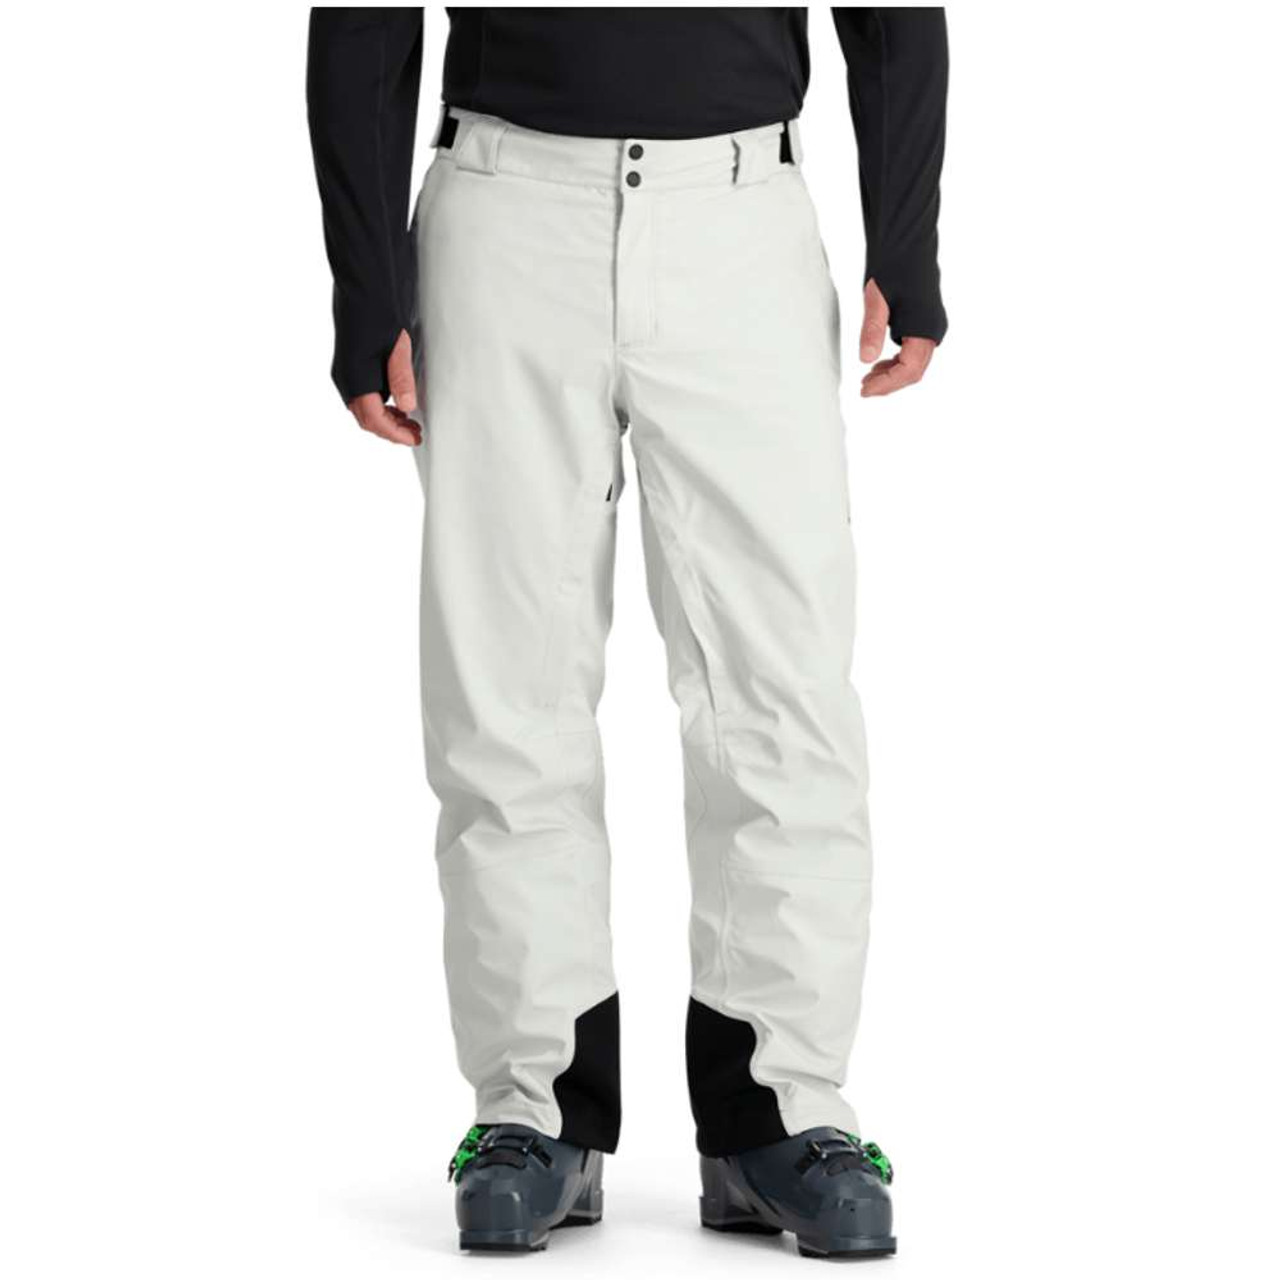 https://cdn11.bigcommerce.com/s-186hk/images/stencil/1280x1280/products/96158/162312/2024-spyder-hone-gore-tex-shell-pant-glacier__76415.1710089848.jpg?c=2?imbypass=on